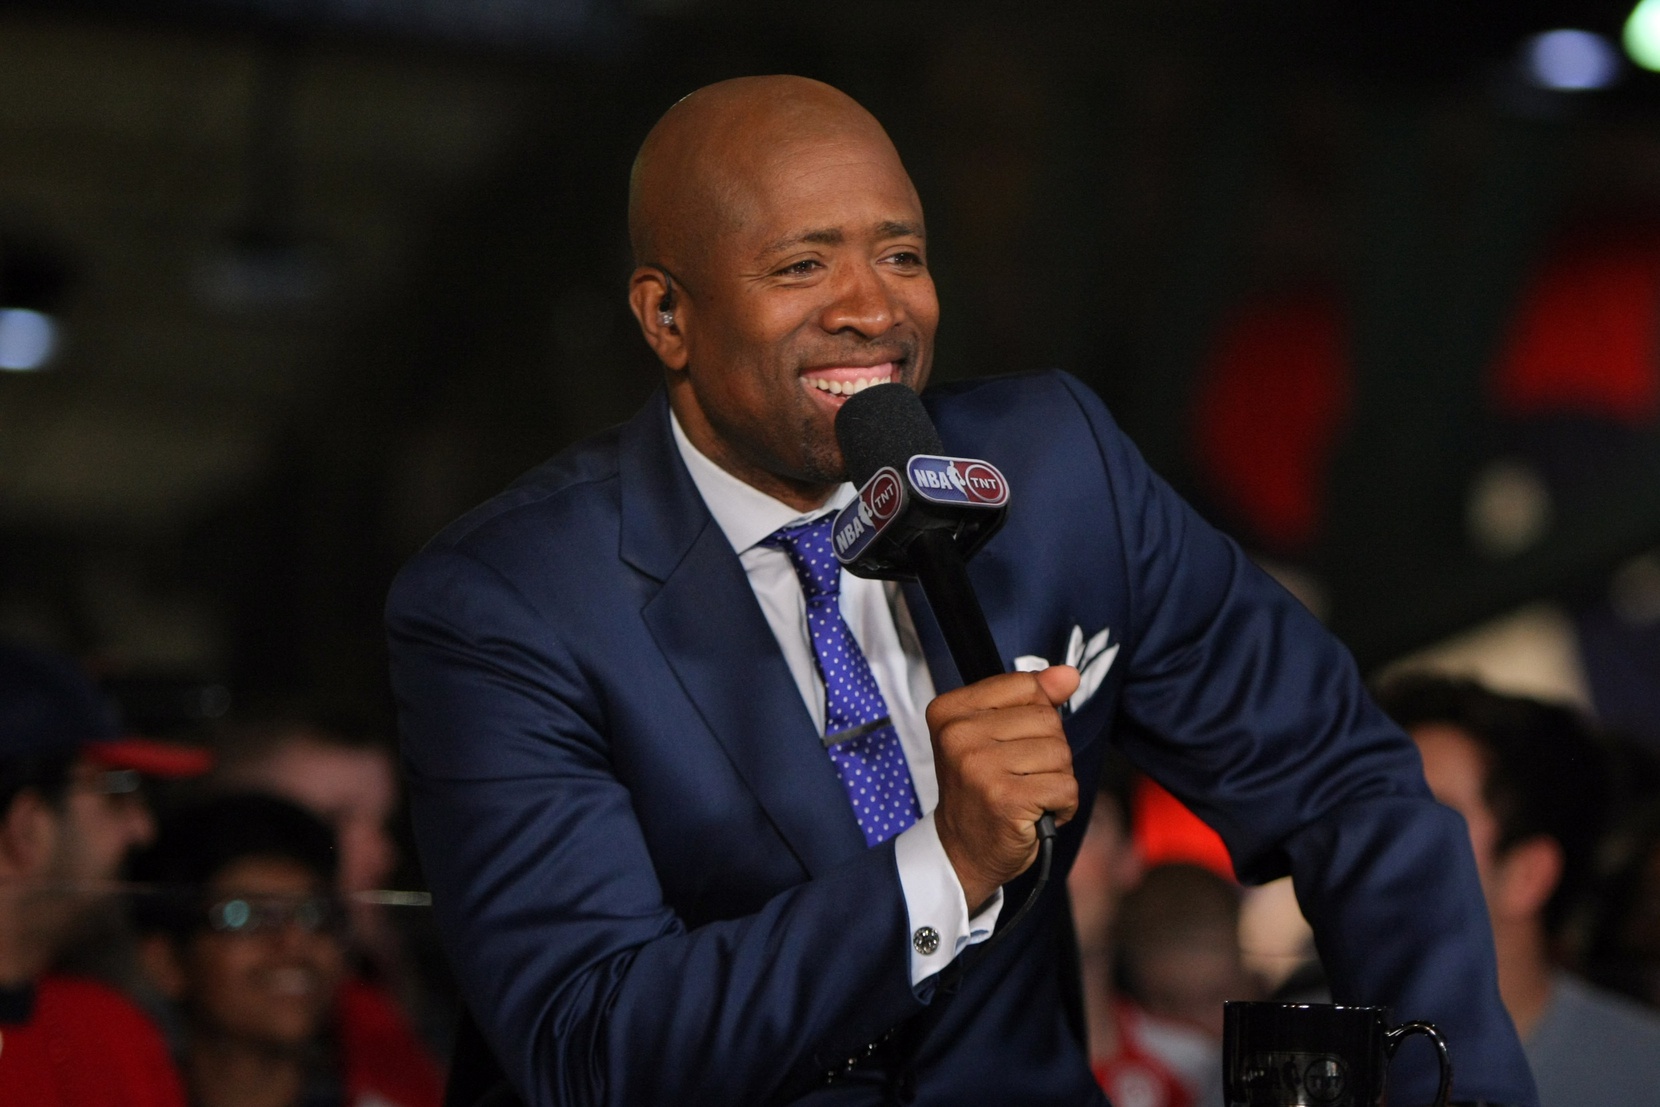 TNT's Kenny Smith spoke to FOS about ESPN's layoffs and Inside The NBA's success.